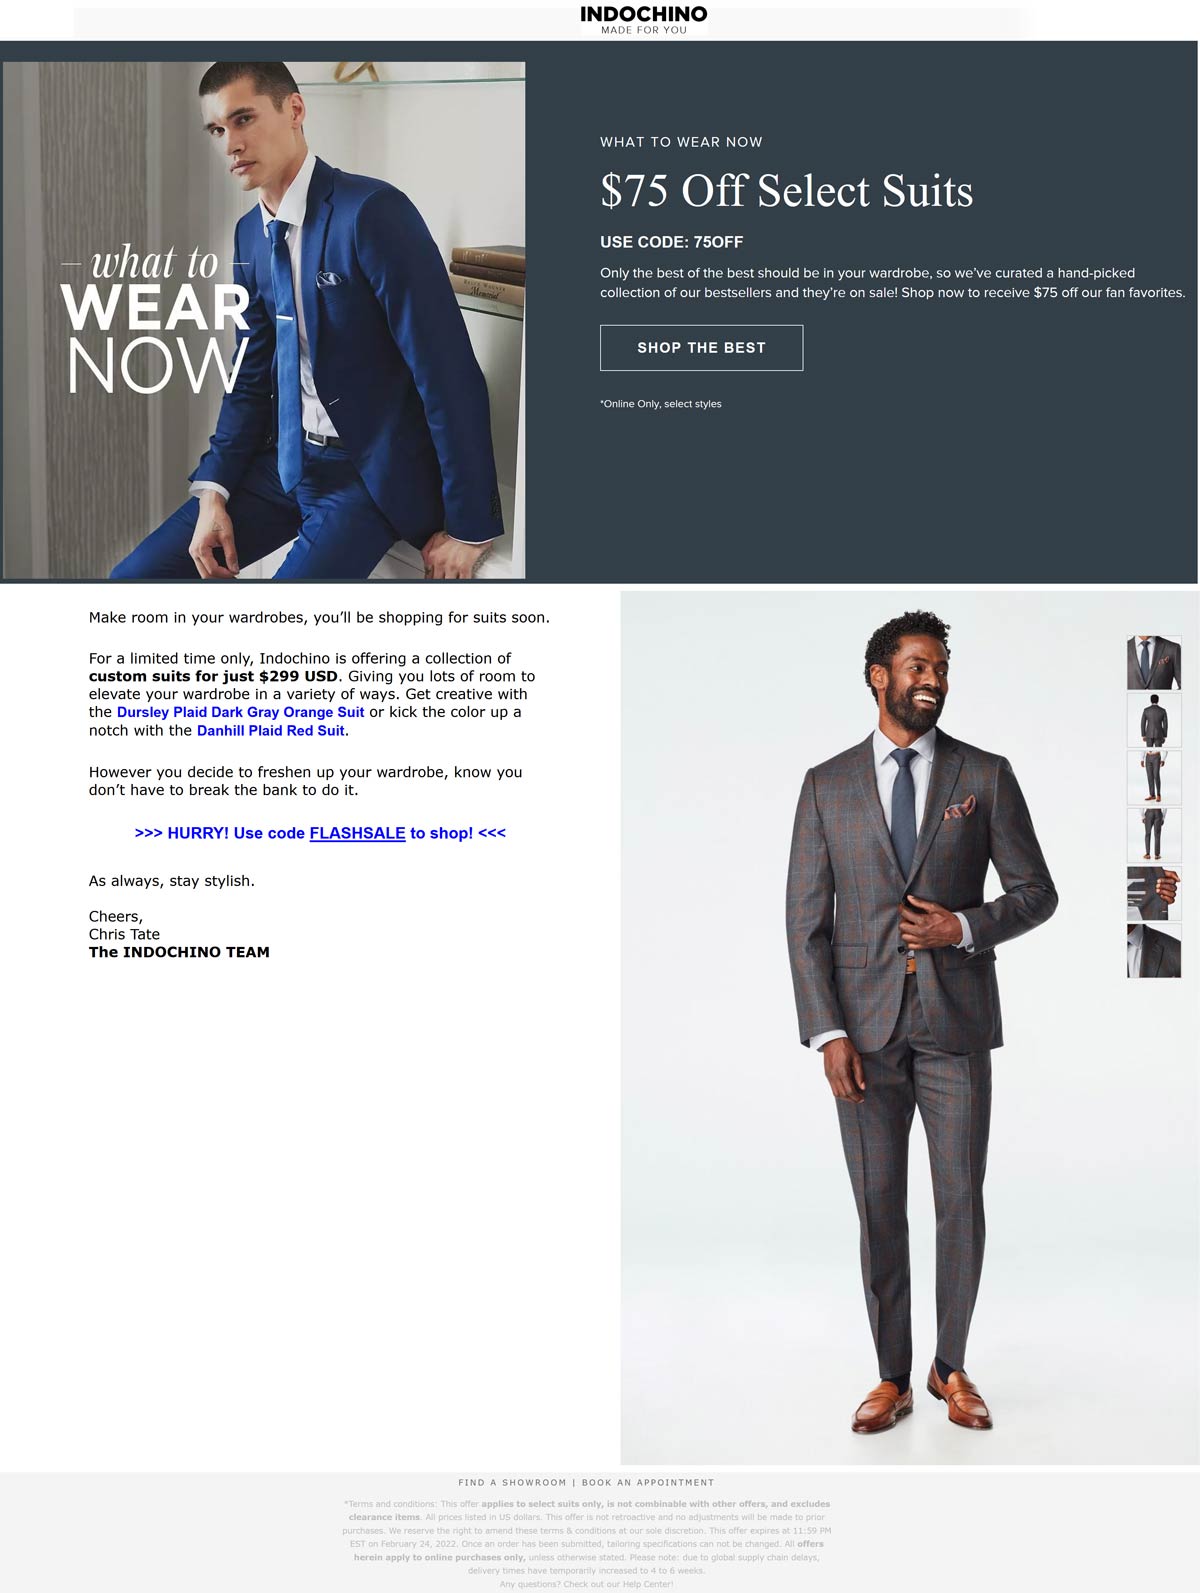 Indochino stores Coupon  Custom mens fitted suits for $299 at Indochino via promo code FLASHSALE #indochino 